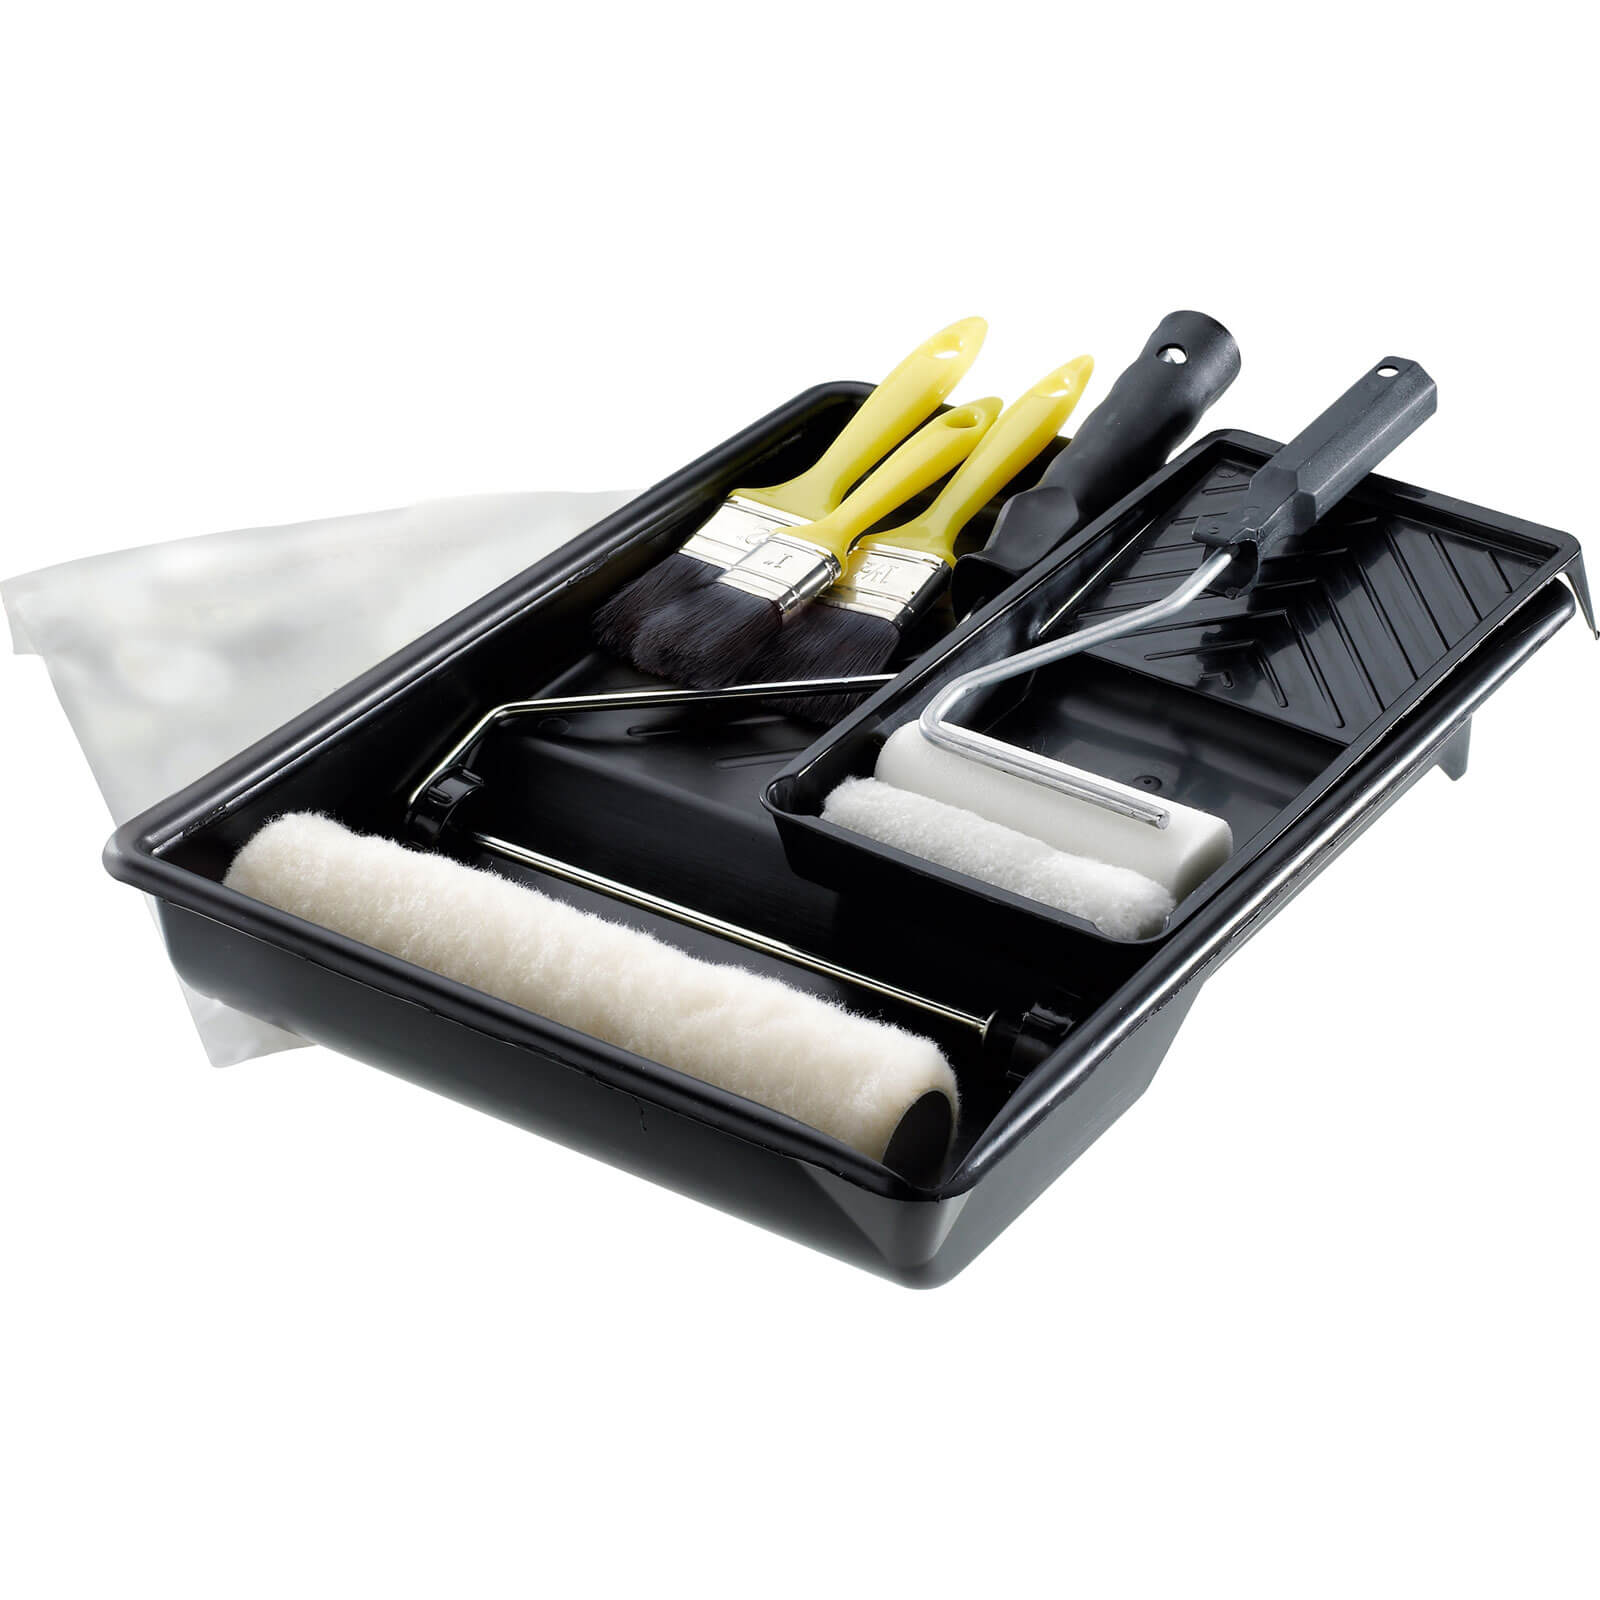 Photo of Stanley 10 Piece Painting And Decorating Tool Set